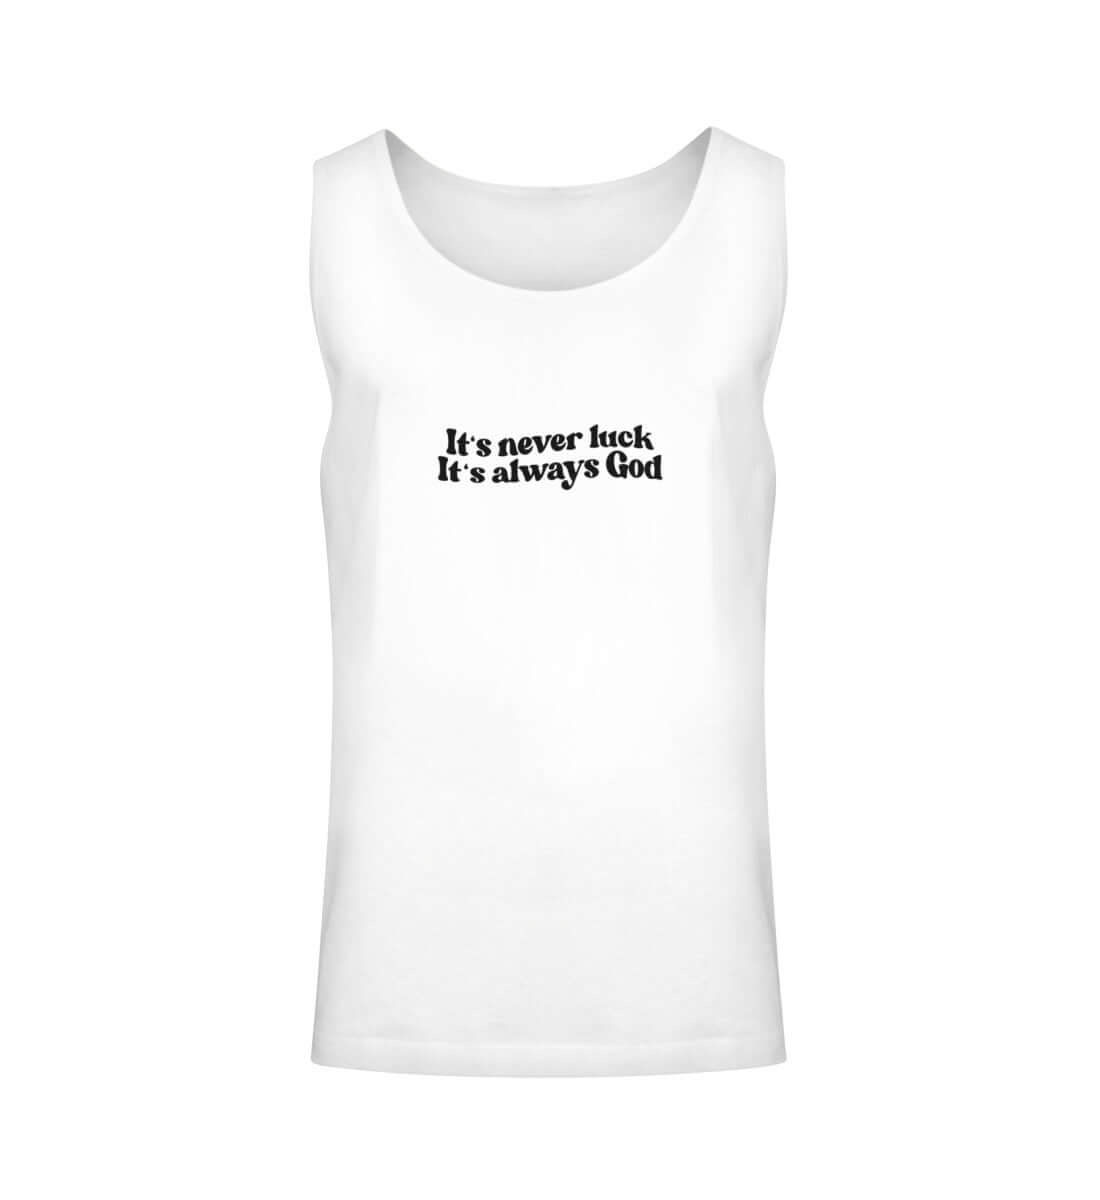 'IT'S NEVER LUCK IT'S ALWAYS GOD' - Unisex Relaxed Tanktop - GODVIBES